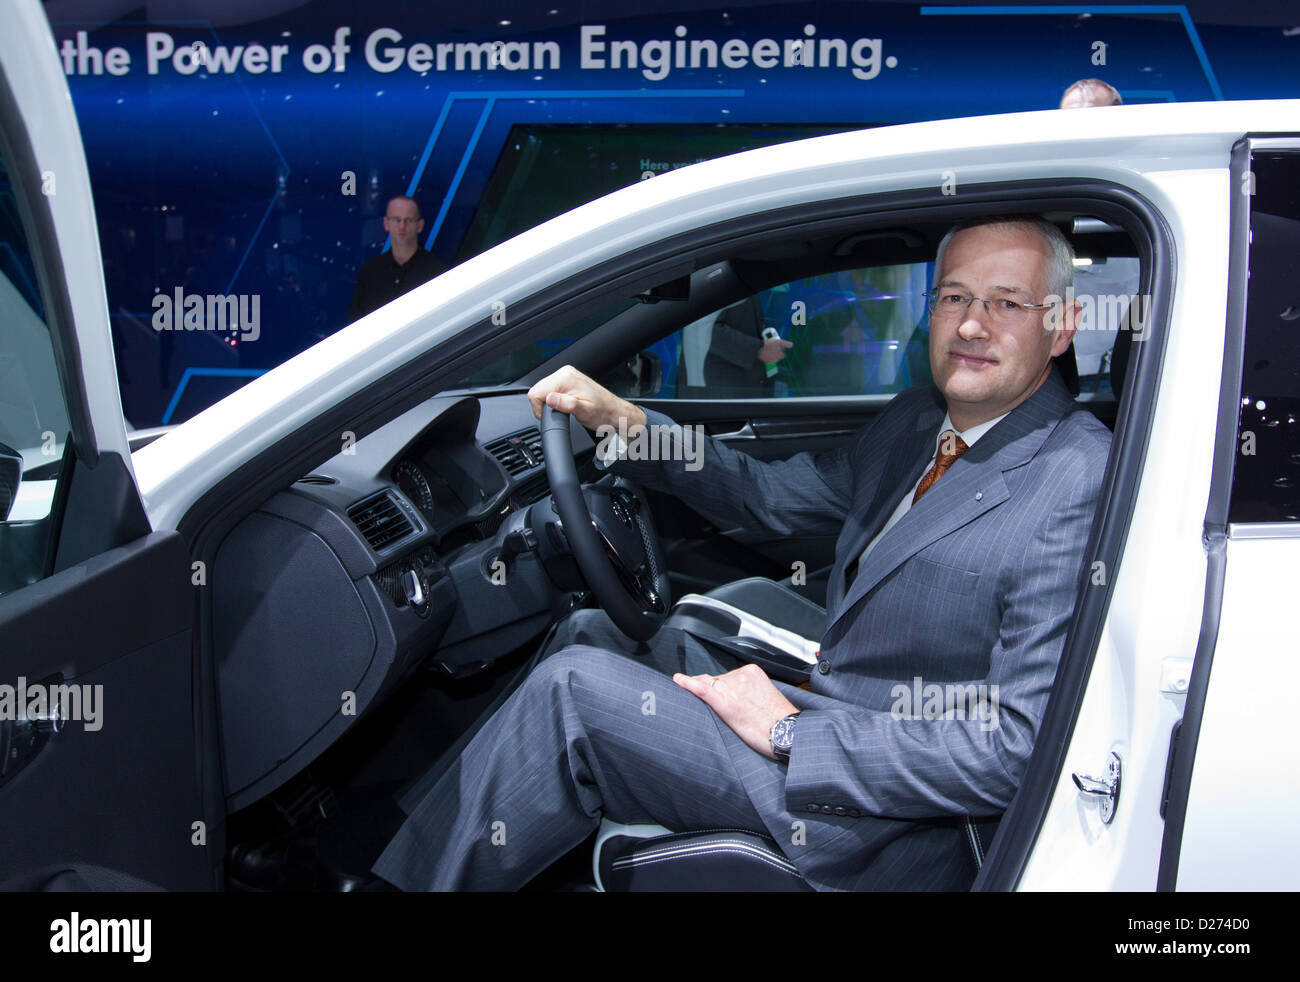 The HANDOUT picture shows the head Volkswagen Group of America, Jonathan Browning, sitting behind the steering wheel of a Volkswagen Passat Performance Concept car at the North American International Auto Show (NAIAS) in Detroit, USA, 14 January 2013. NAIAS opened officially on 14 January 2013 and is open for the general public from 19 January to 27 January 2013. Photo: Friso Gentsch / Volkswagen Stock Photo